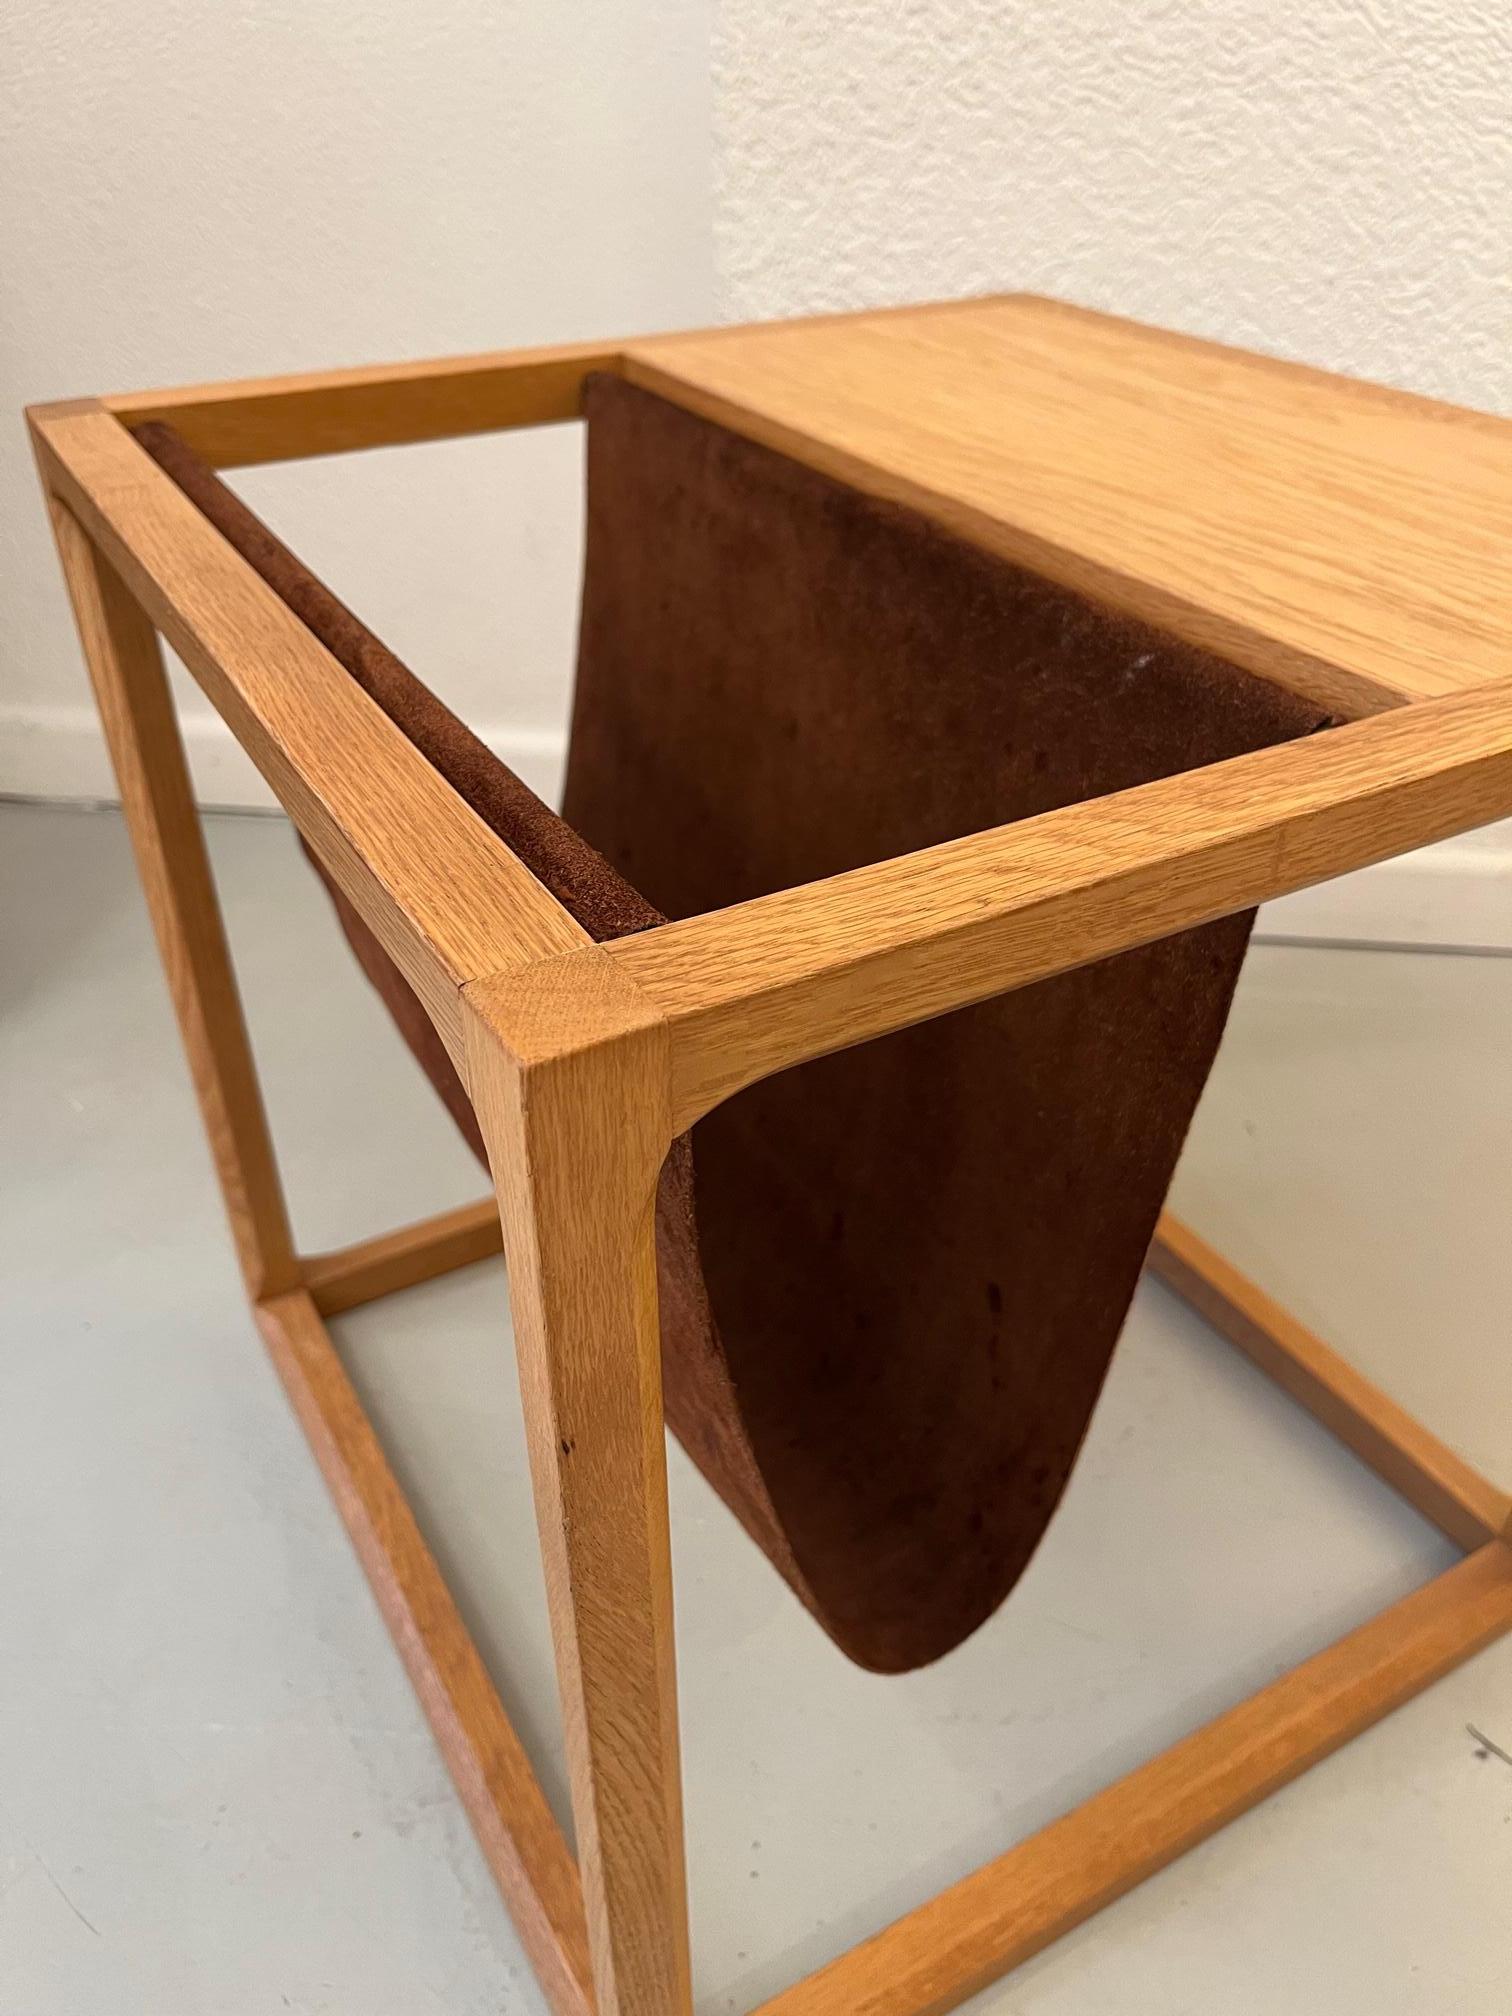 Vintage cube oak and suede side table / magazine rack by Kai Kristiansen produced by Aksel Kjersgaard, Denmark ca. 1960s
Very good condition. 
L 44.5 x D 44.5 x H 44.5 cm
